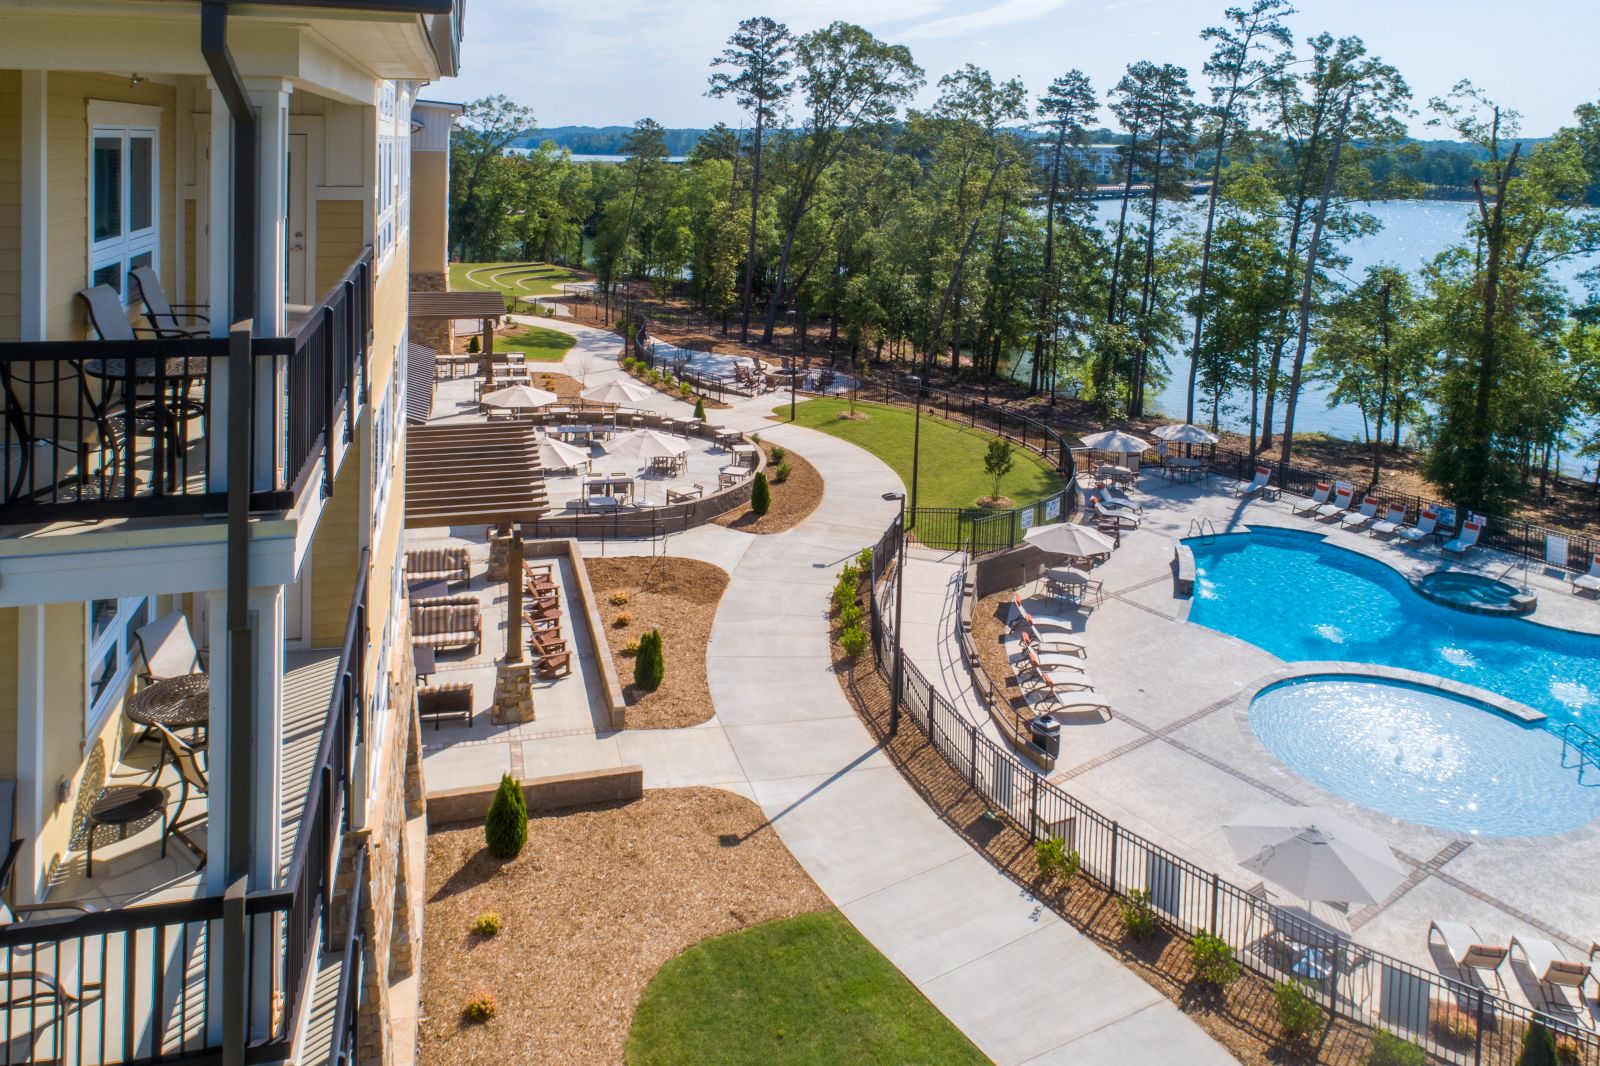 Lakeside Lodge has 190 hotl rooms/suites available for overnight stays and short term rentals. (Photo/Provided)